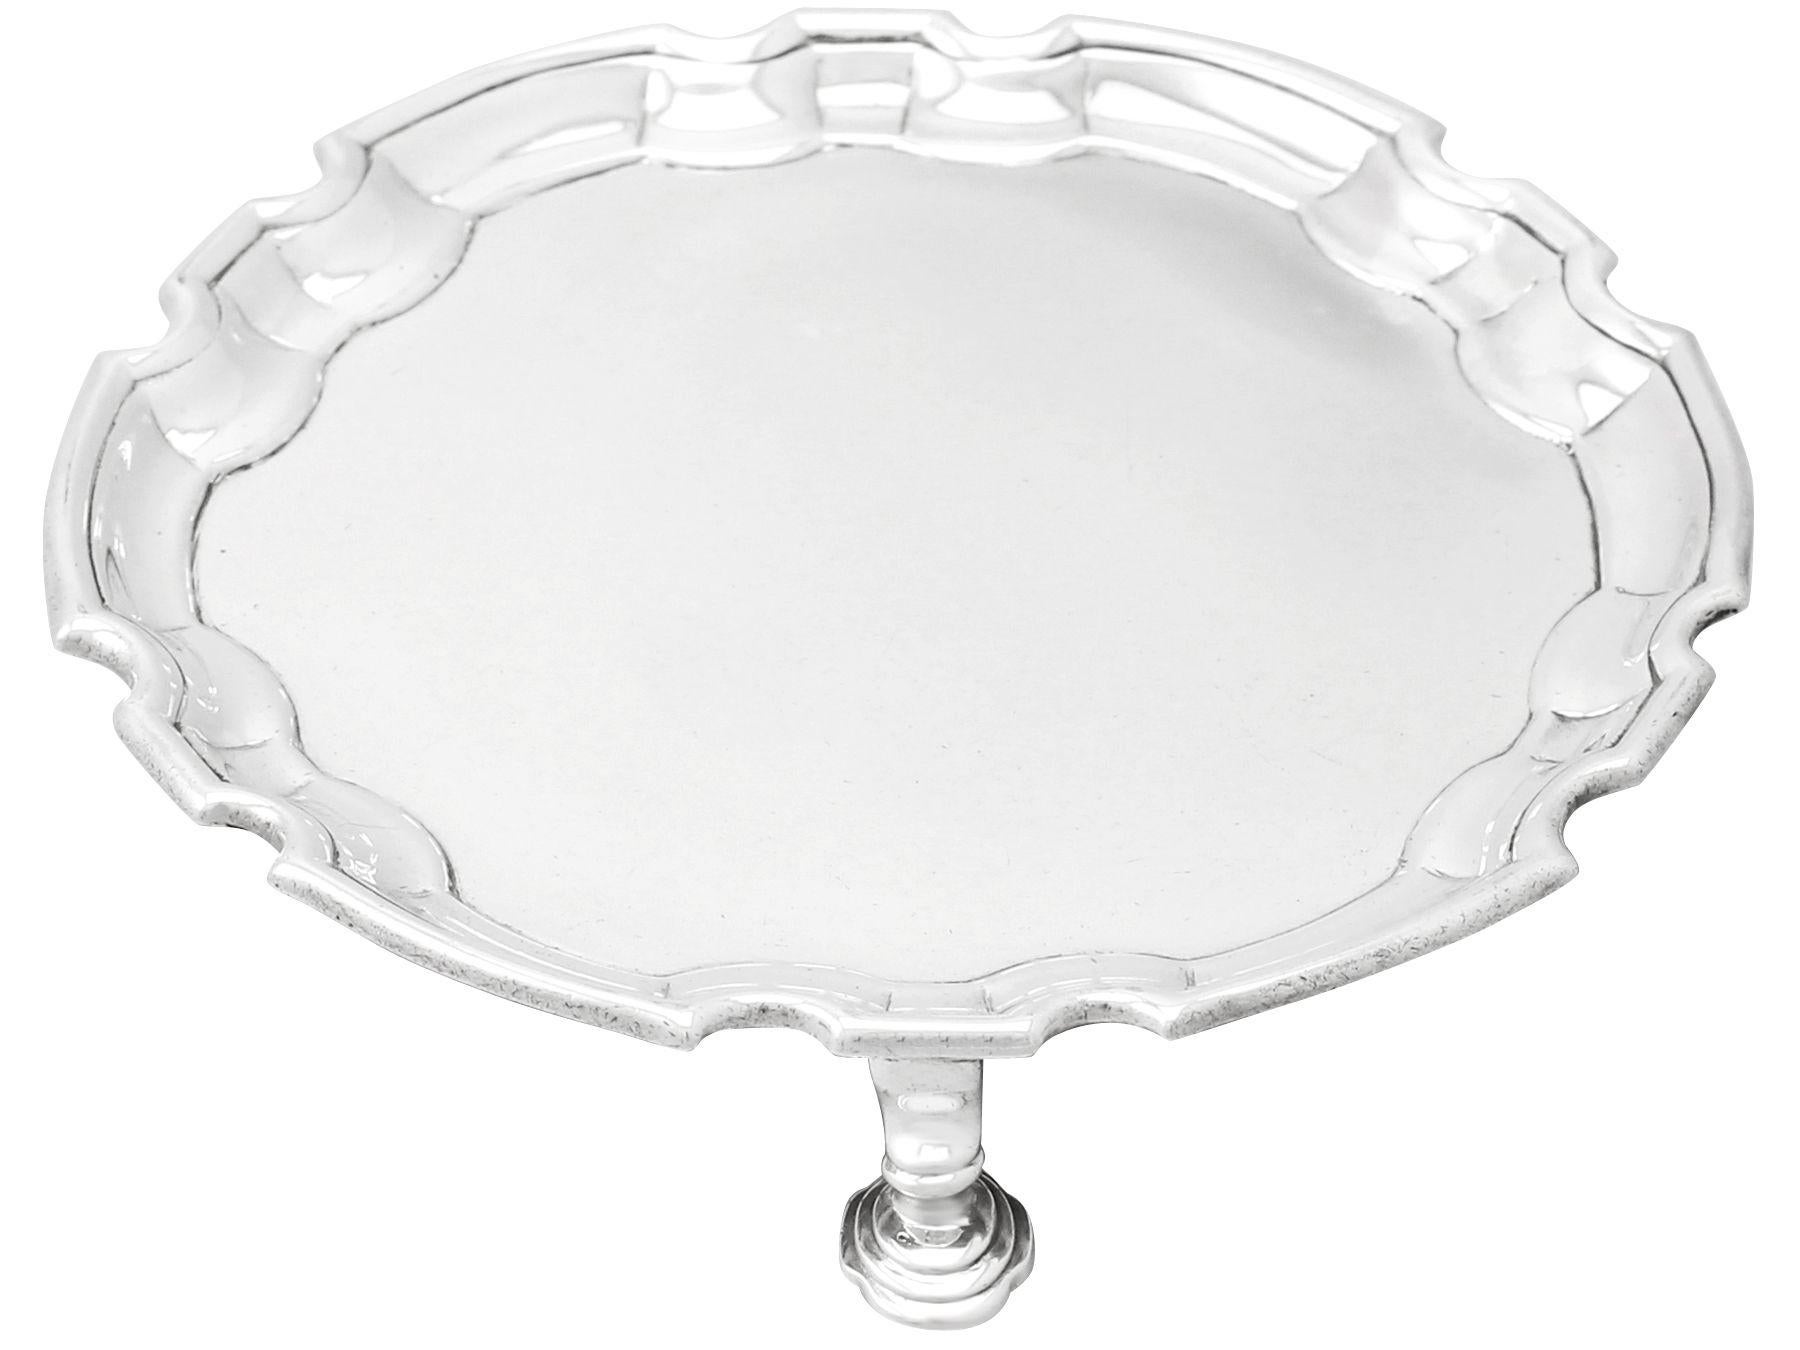 A fine and impressive antique George II English sterling silver waiter; an addition to our Georgian dining collection.

This fine antique George II English sterling silver waiter has a plain circular shaped form onto three stepped hoof style